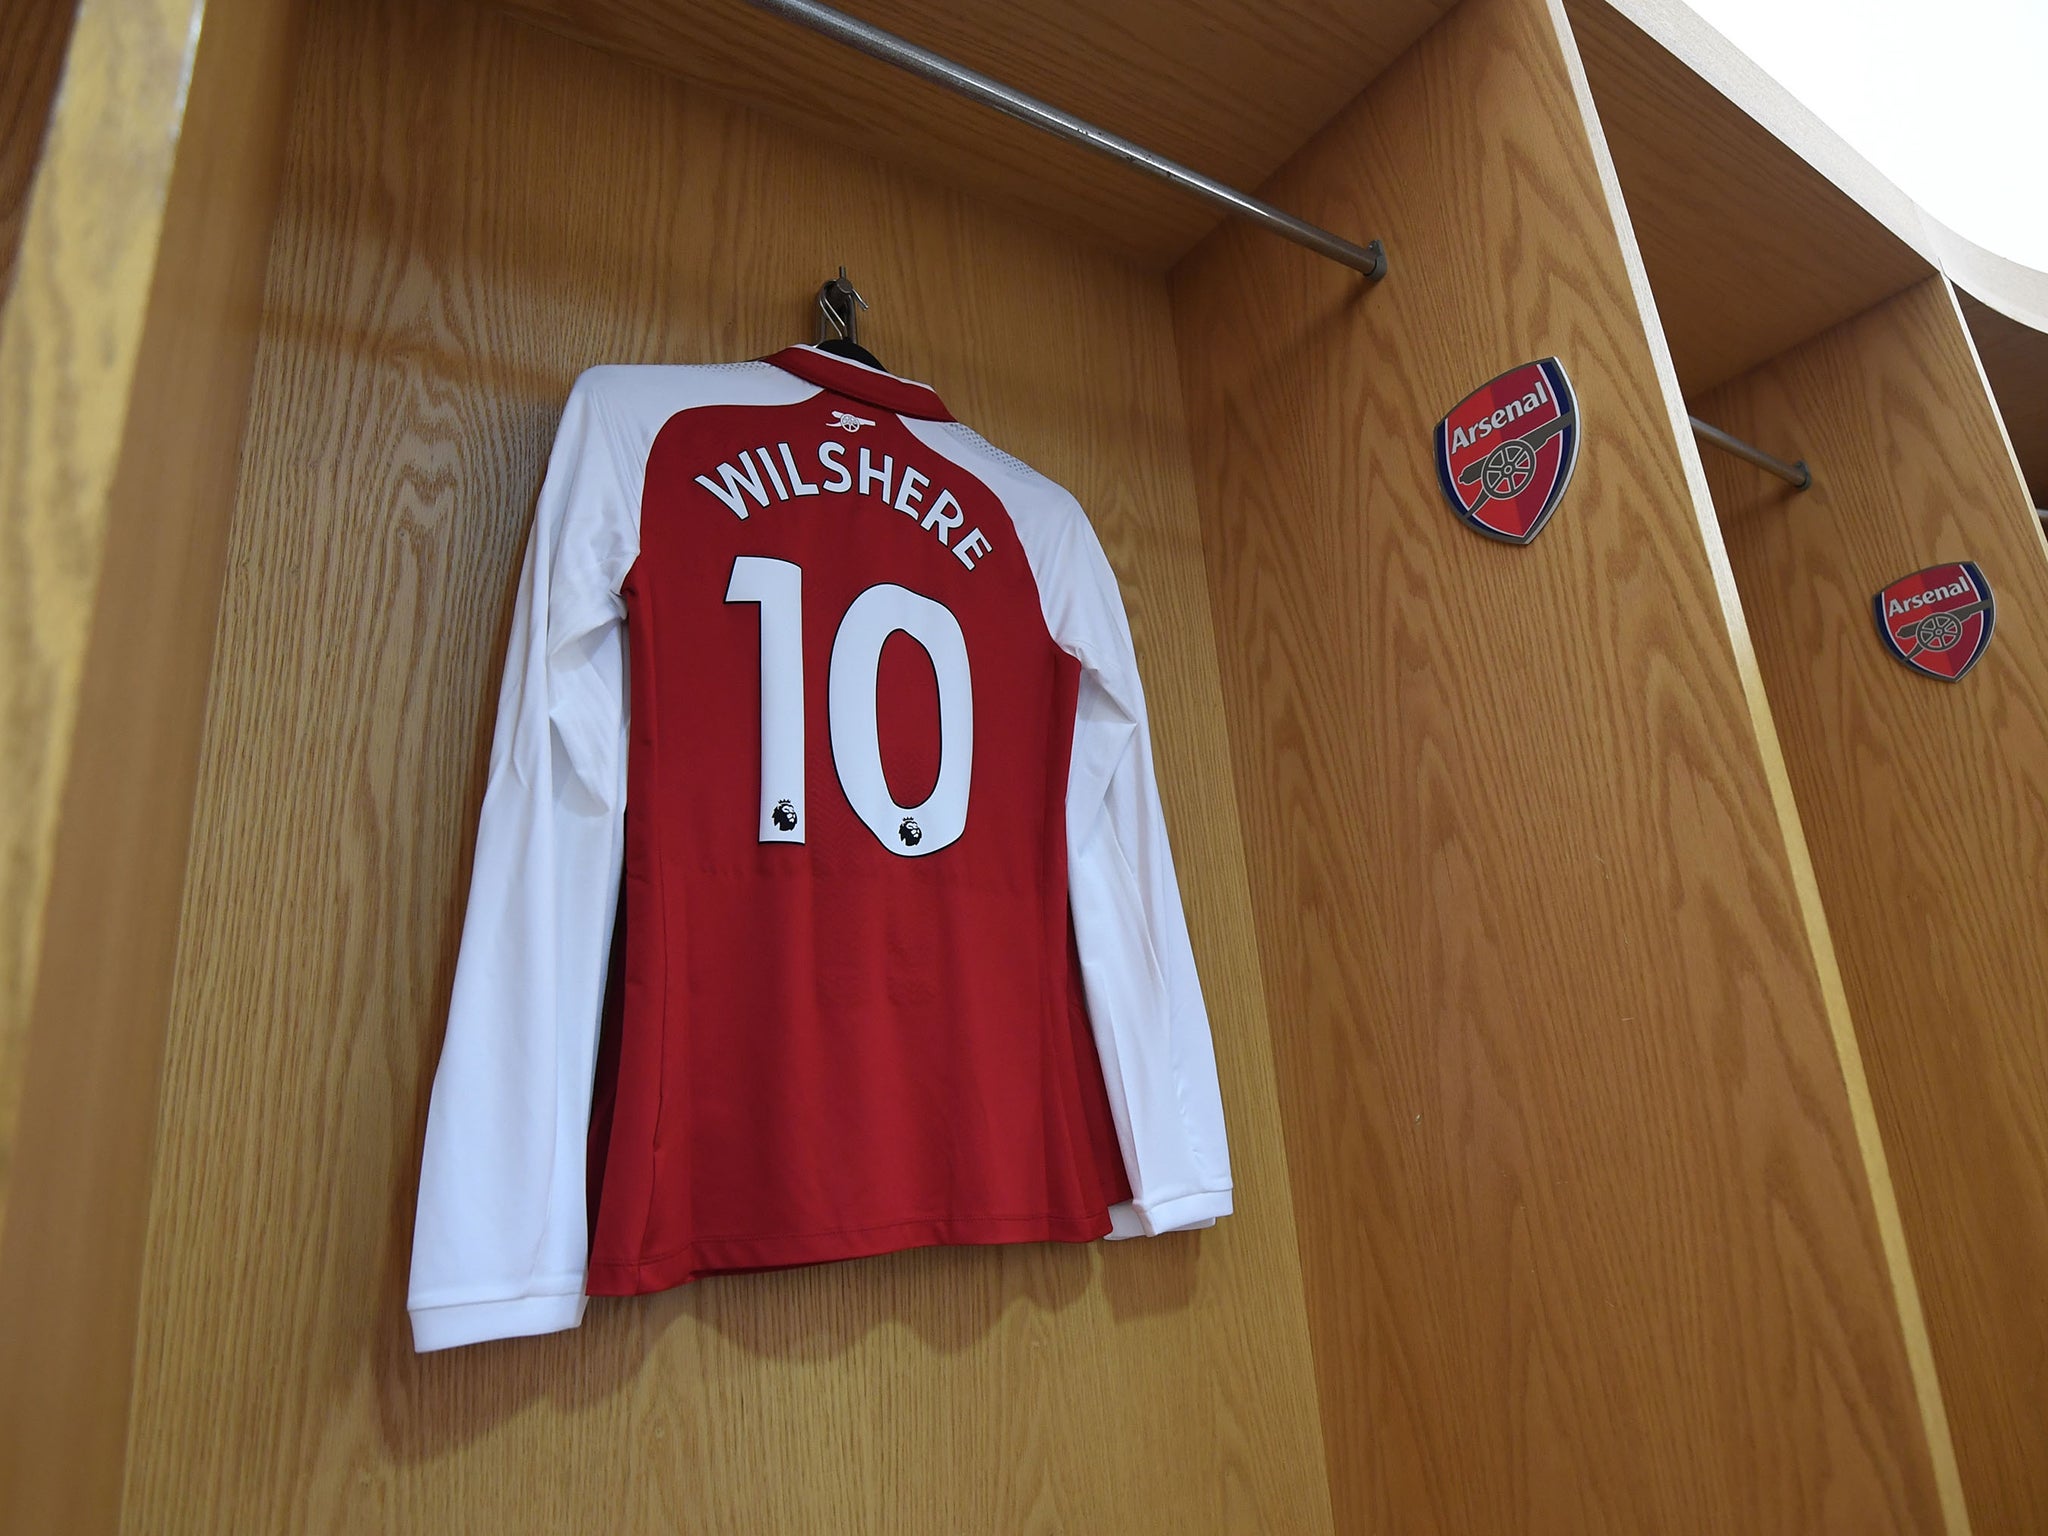 Jack Wilshere relinquished the No 10 shirt by leaving Arsenal last month